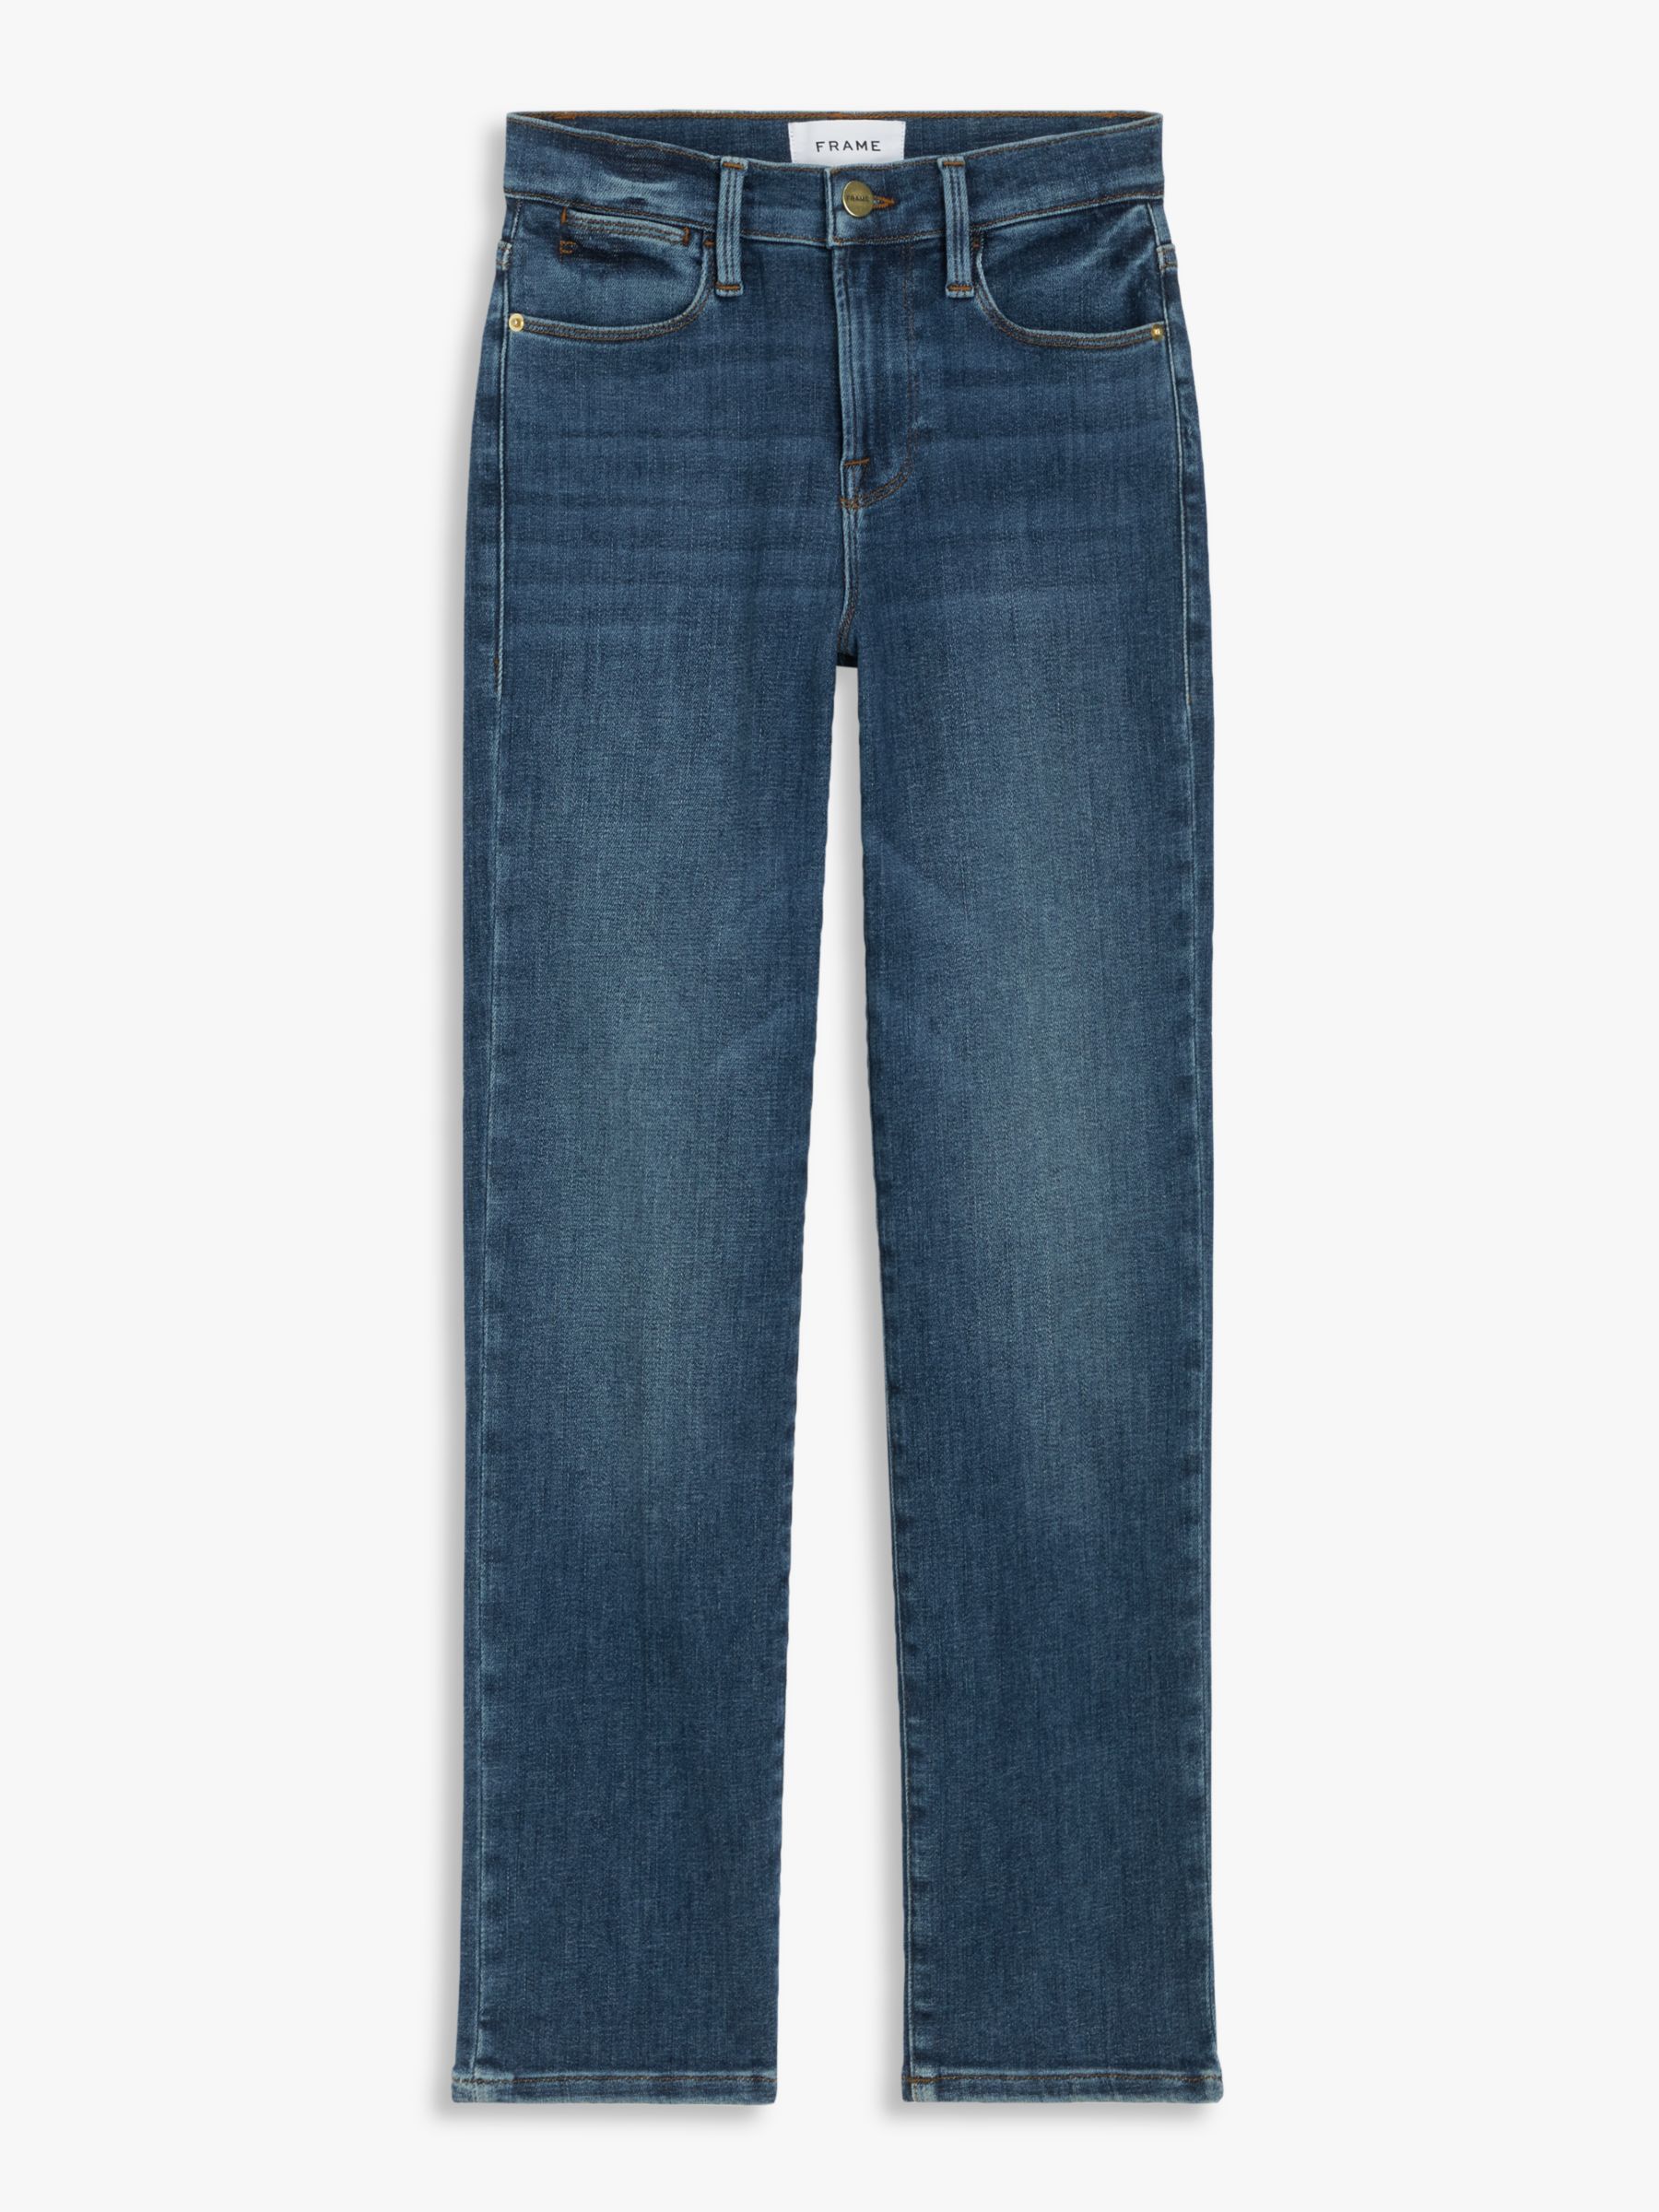 FRAME Le Garcon Straight Jeans, Bestia at John Lewis & Partners